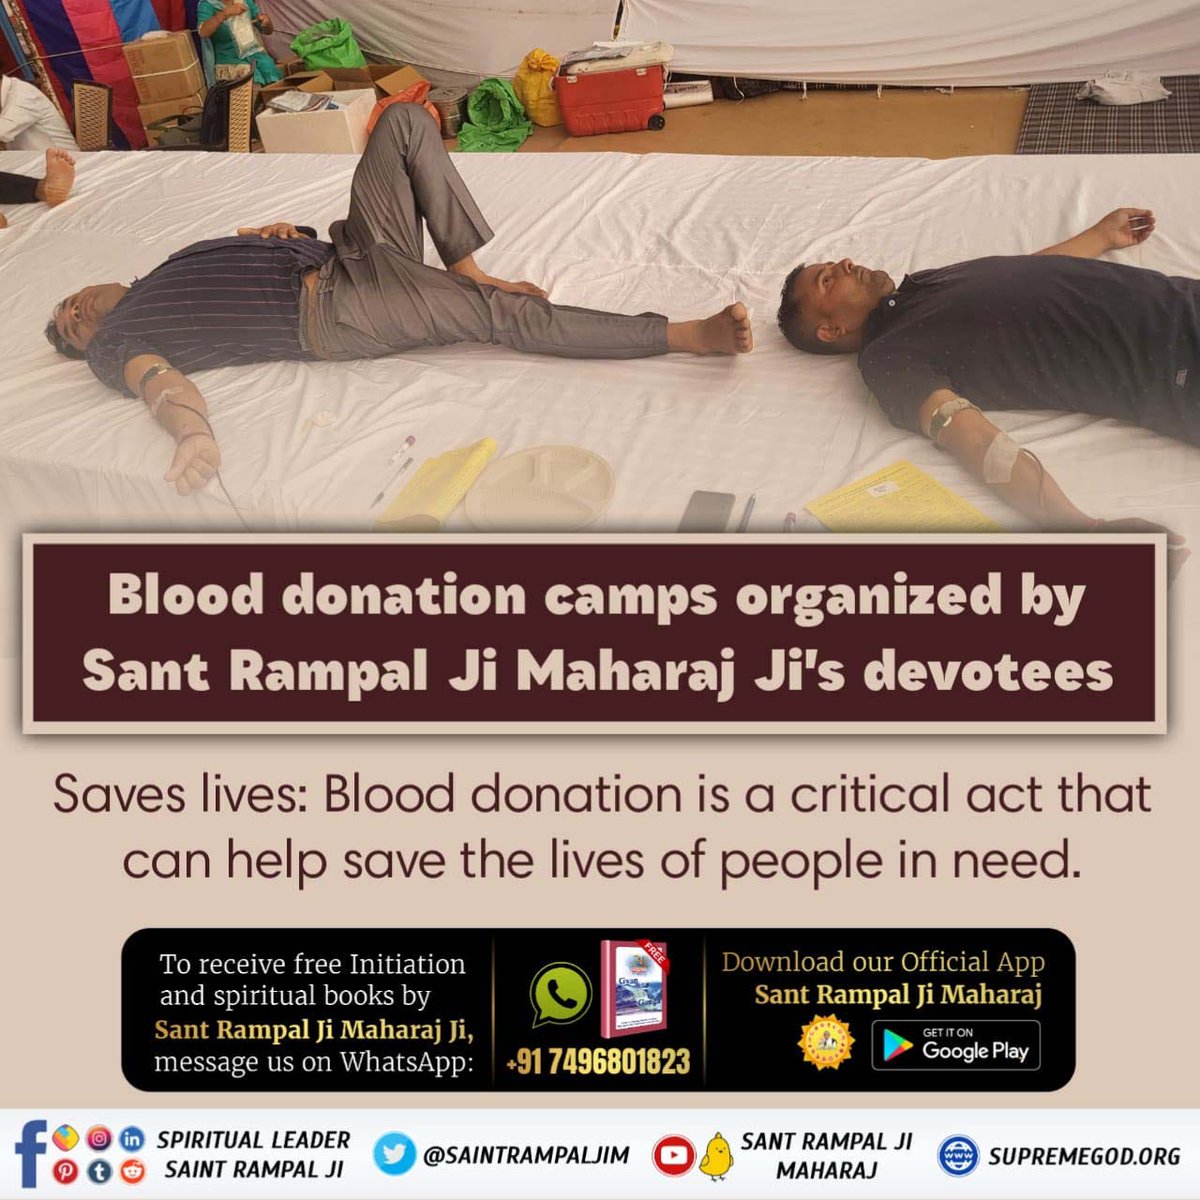 #SaveLives_DonateBlood Blood donation camps organized by Sant Rampal Ji Maharaj Ji's devotees Saves lives: Blood donation is a critical act that can help save the lives of people in need. #GodMorningWednesday